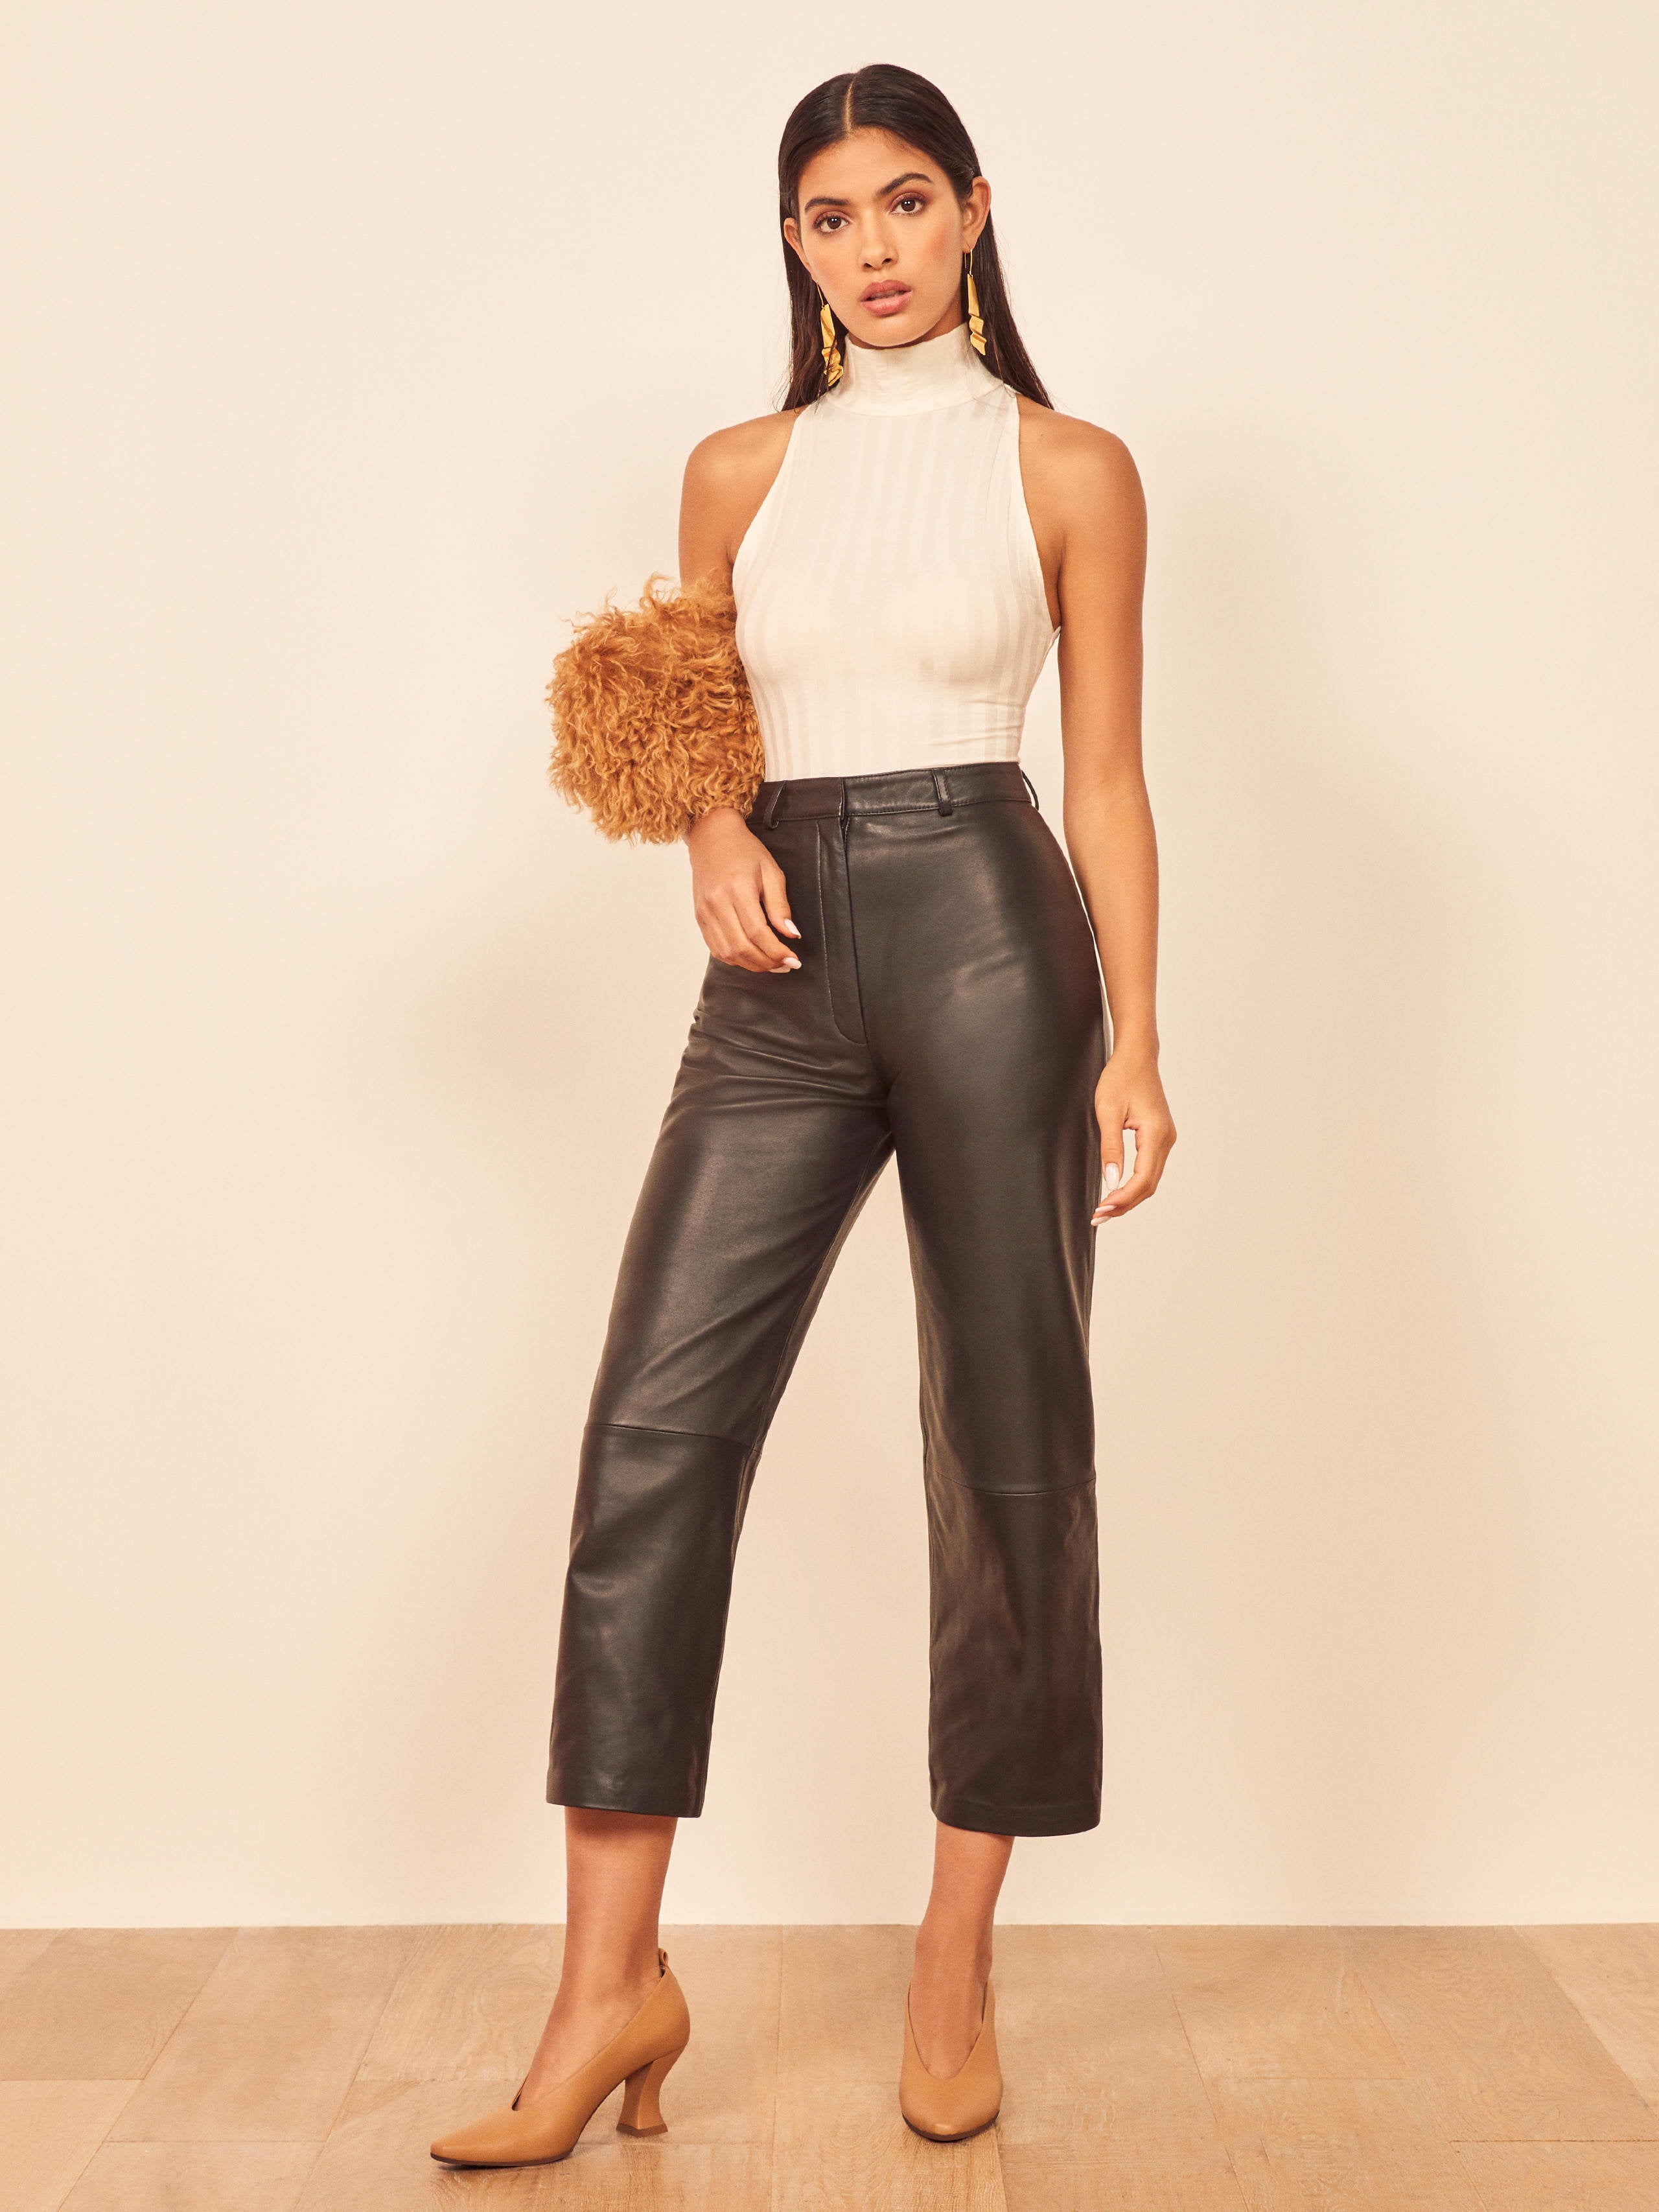 Best Leather Pants For Women 2020